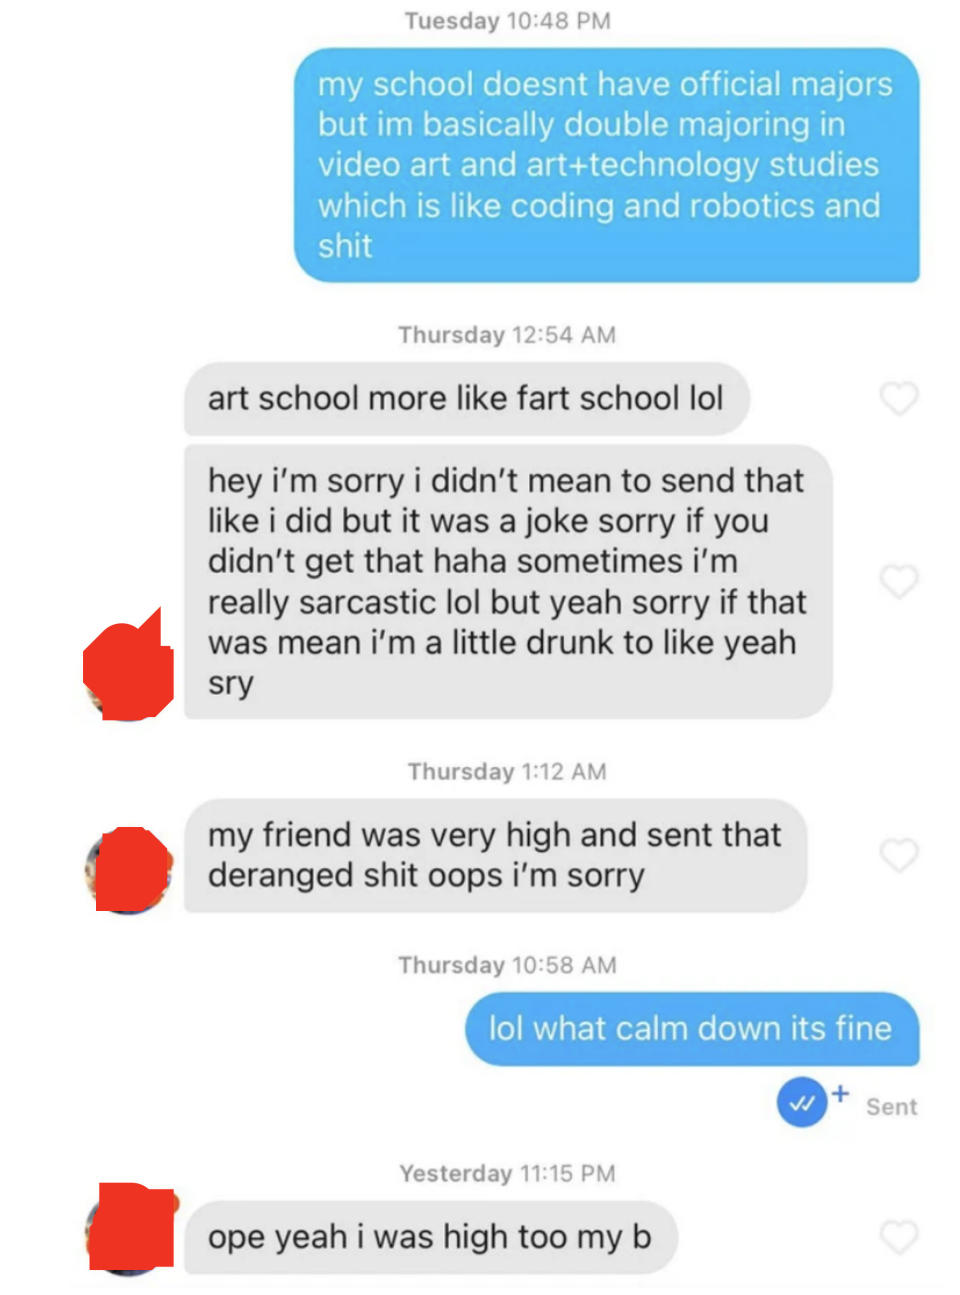 Someone says they're in art school, the other person responds "art school, more like fart school" then sends two texts afterward apologizing for the joke and saying they're drunk and high